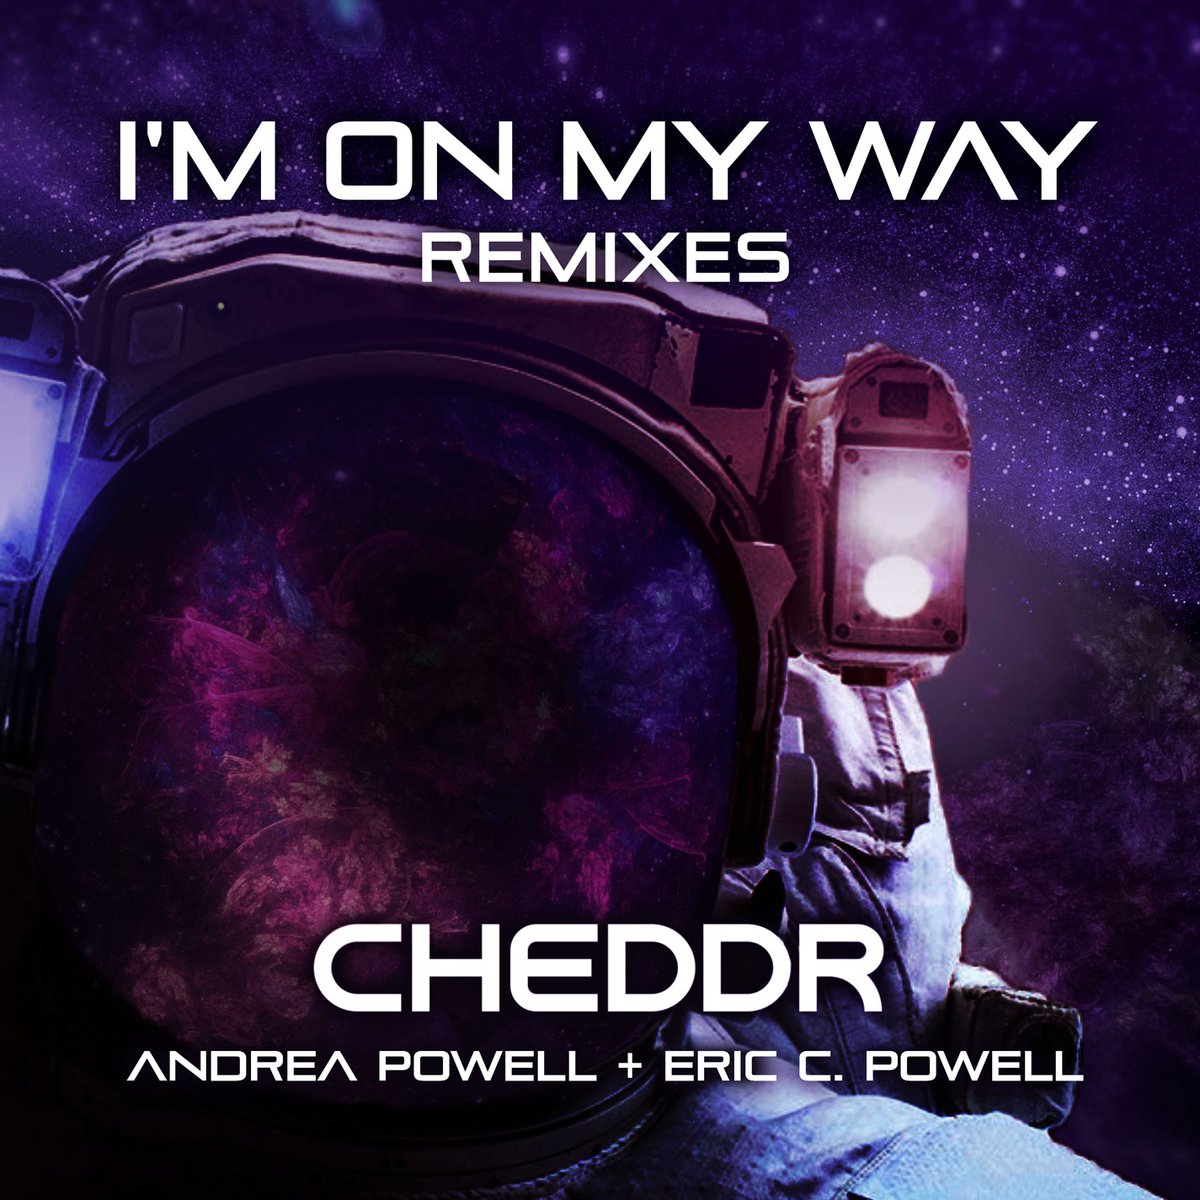 We love our @CheddrMusic collab I'M ON MY WAY ft @PurpleRoseAndy and you will too!! Thanks Martin for playing this on @RDTVF! linktr.ee/ecpmusic